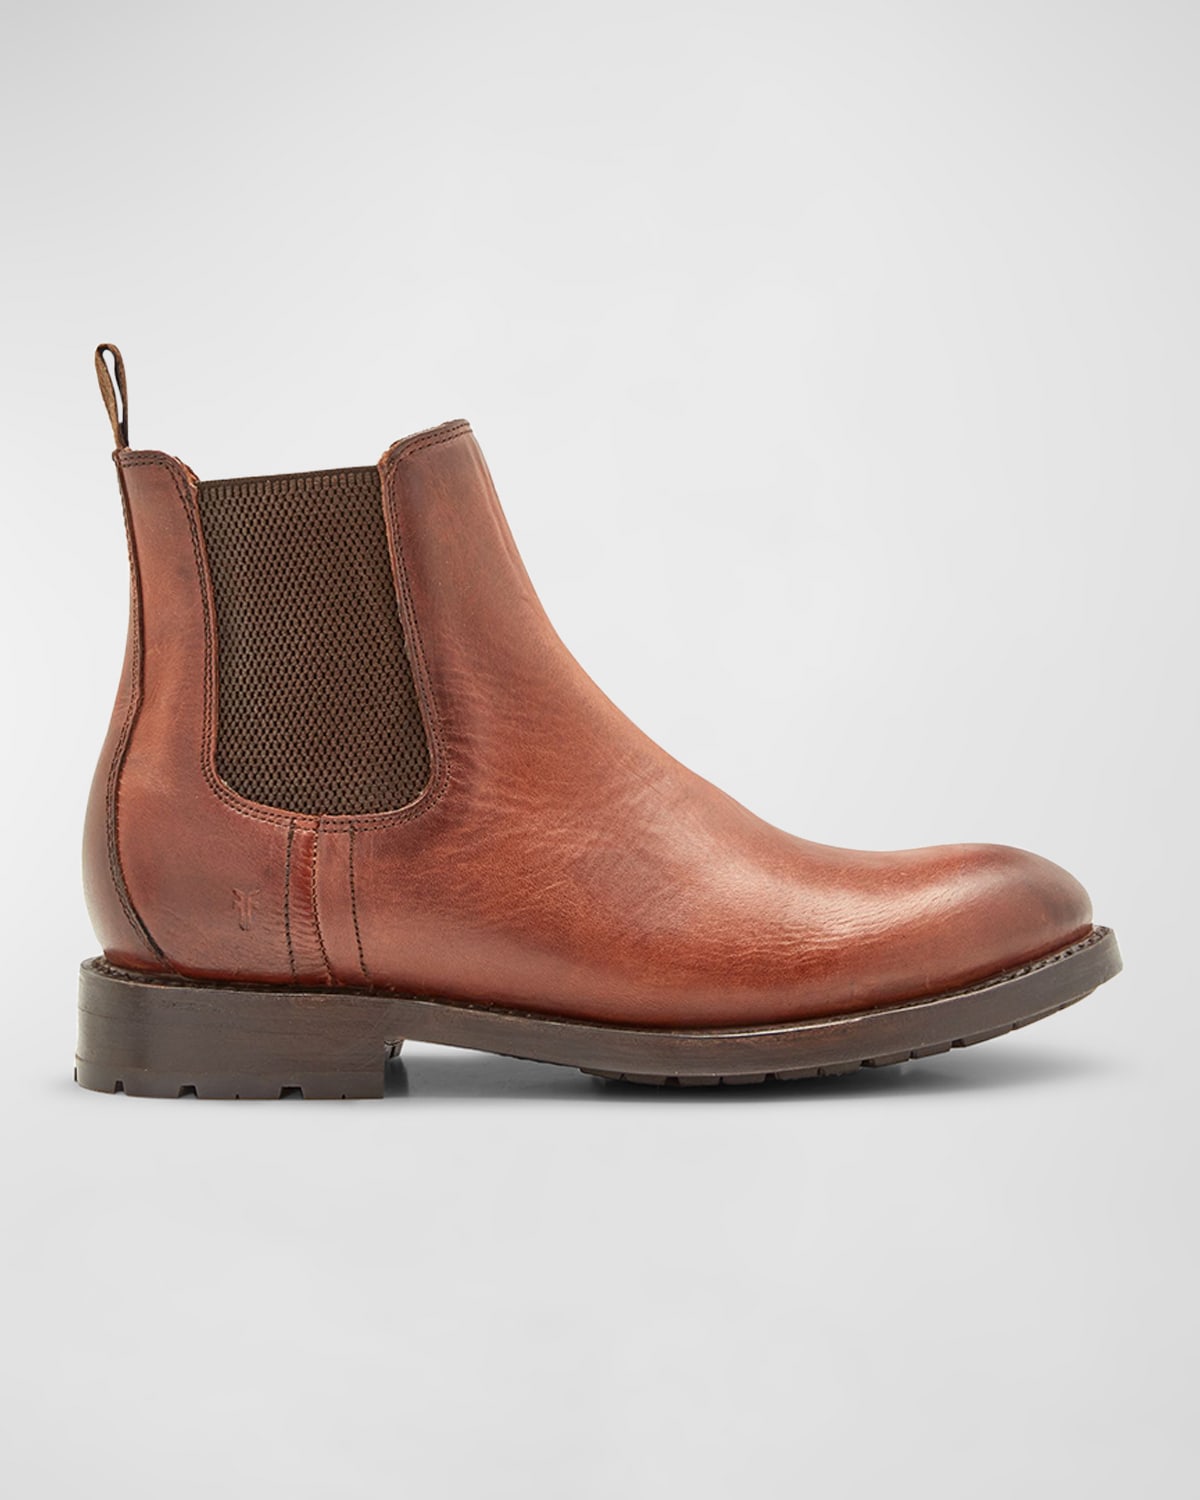 FRYE MEN'S BOWERY LEATHER CHELSEA BOOTS